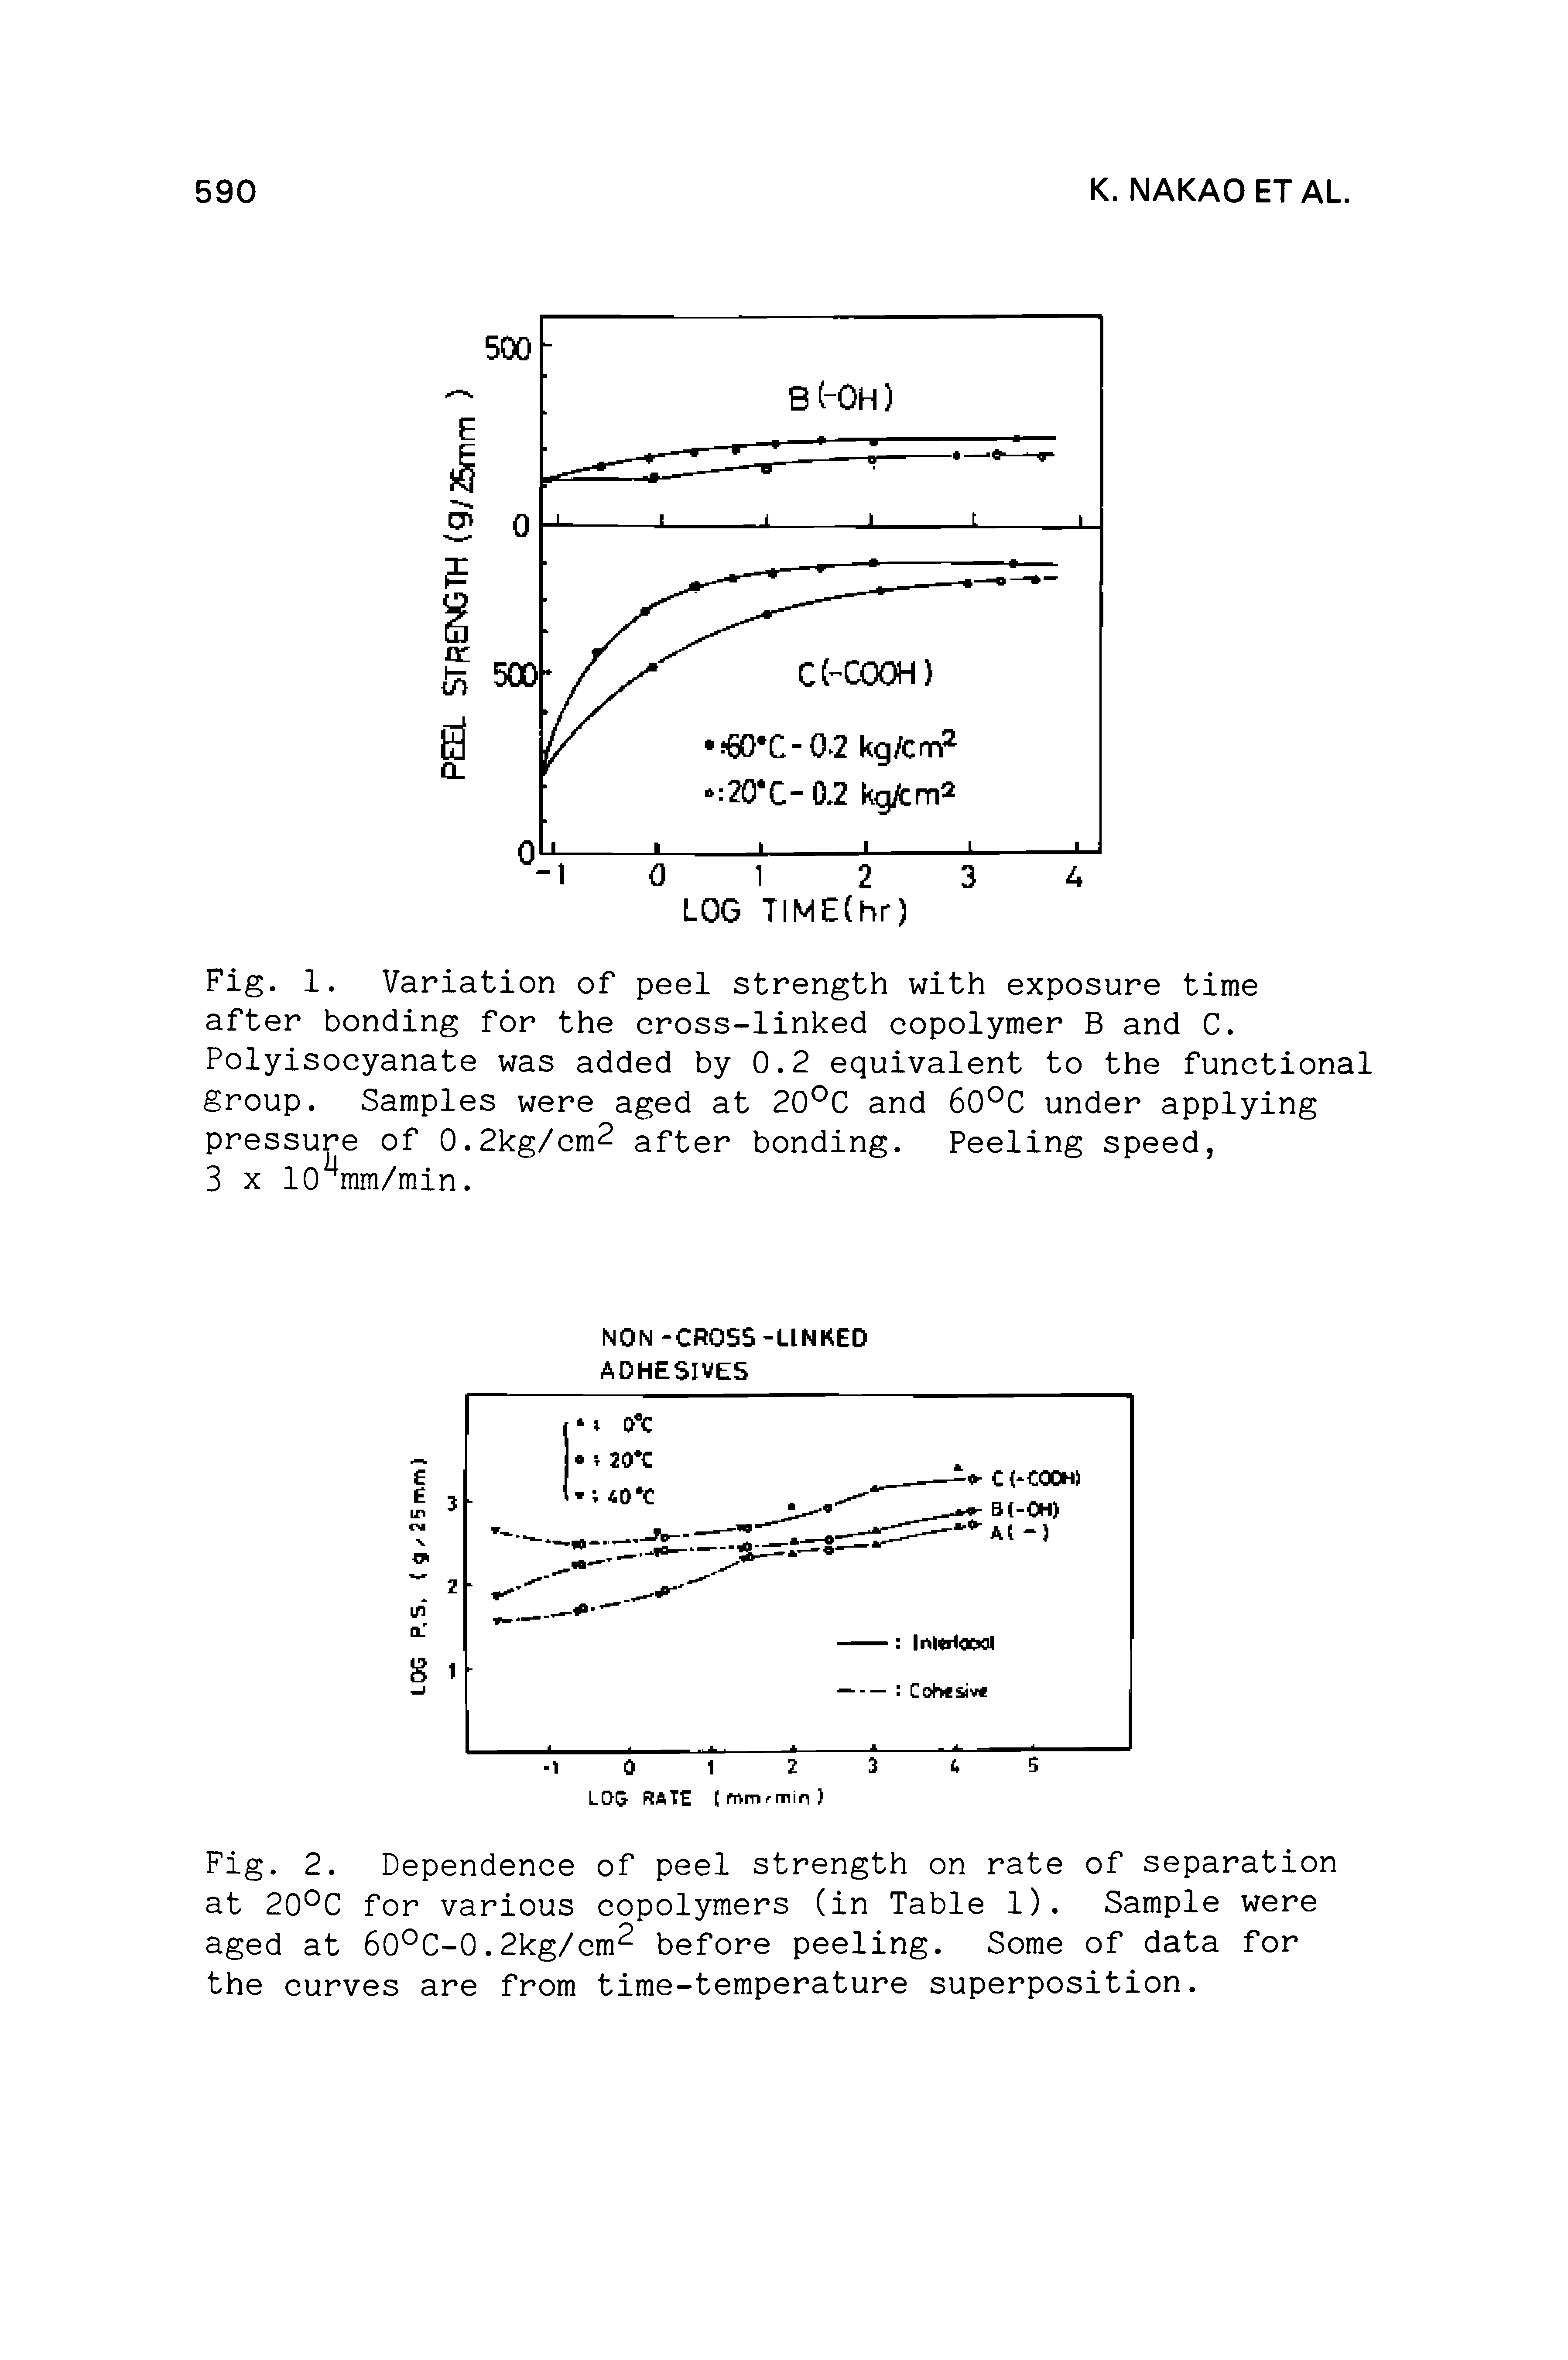 Fig. 2. Dependence of peel strength on rate of separation at 20°C for various copolymers (in Table 1). Sample were aged at 60°C-0.2kg/cm before peeling. Some of data for the curves are from time-temperature superposition.